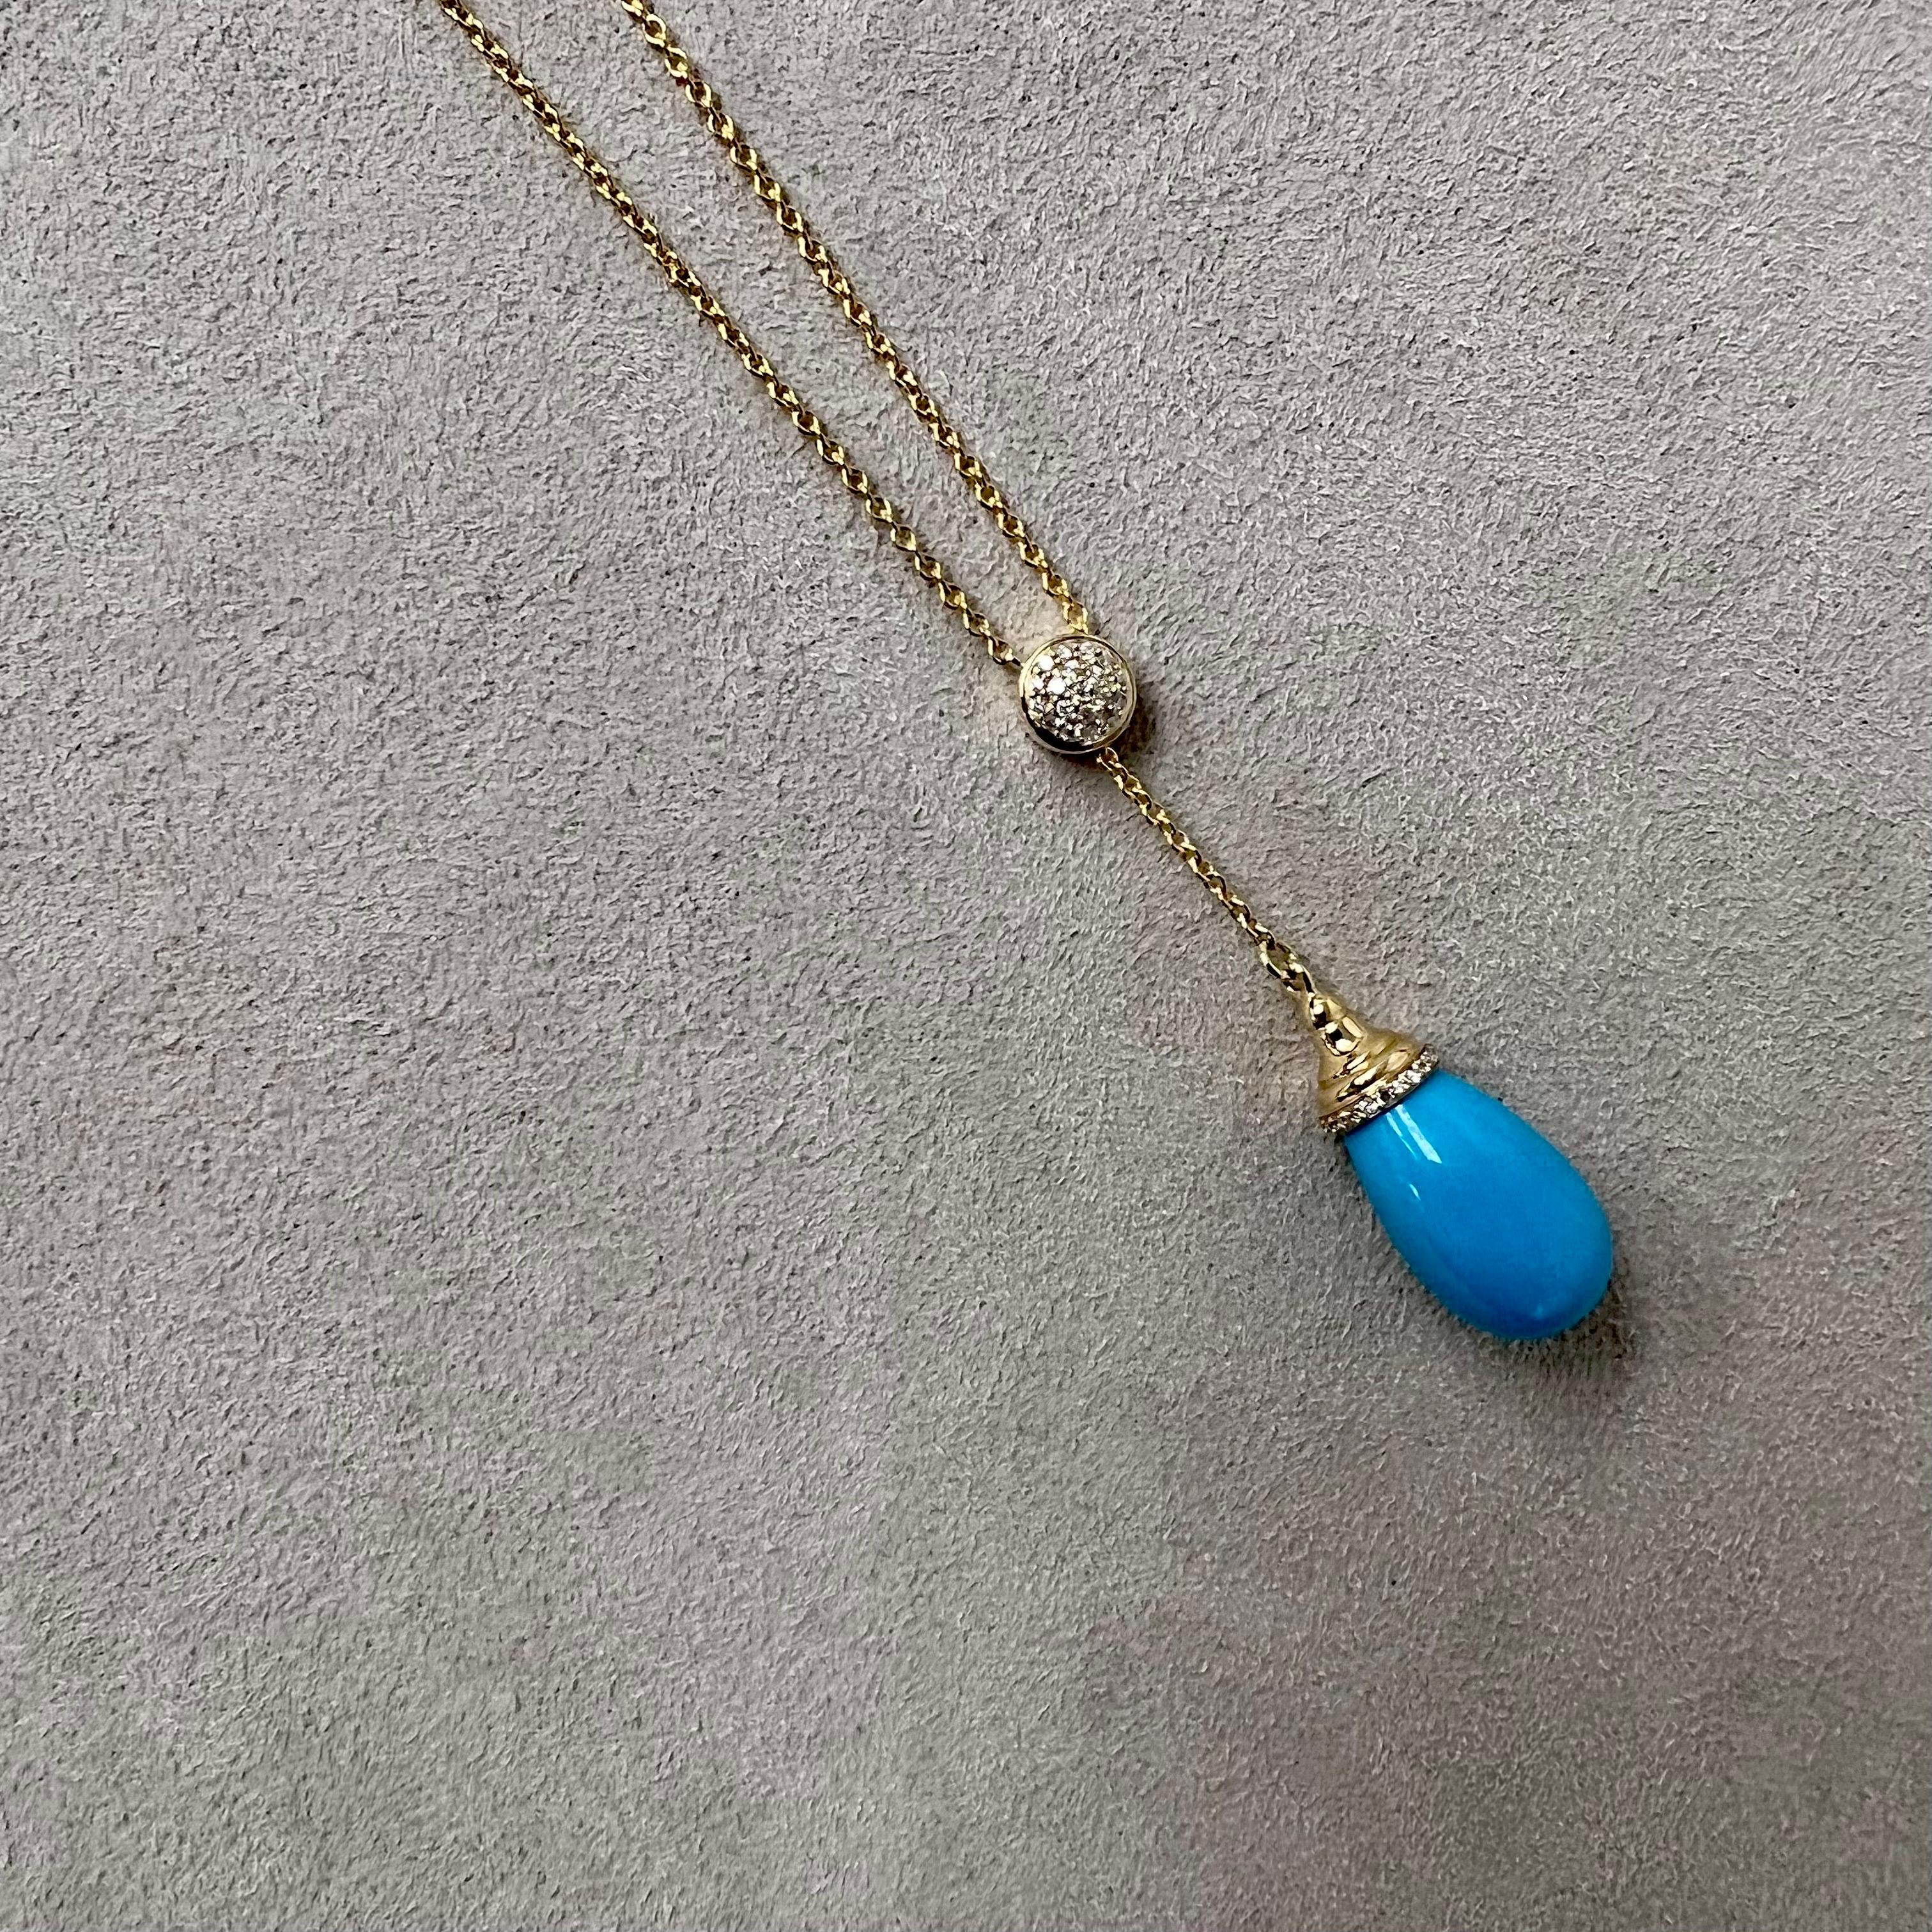 Created in 18 karat yellow gold
Turquoise 14 carats approx.
Diamonds 0.20 carat approx.
24 inch, adjustable lariat
Limited edition

Exquisitely crafted from 18-karat yellow gold, this pendant is set with a stunning turquoise of approximately 14